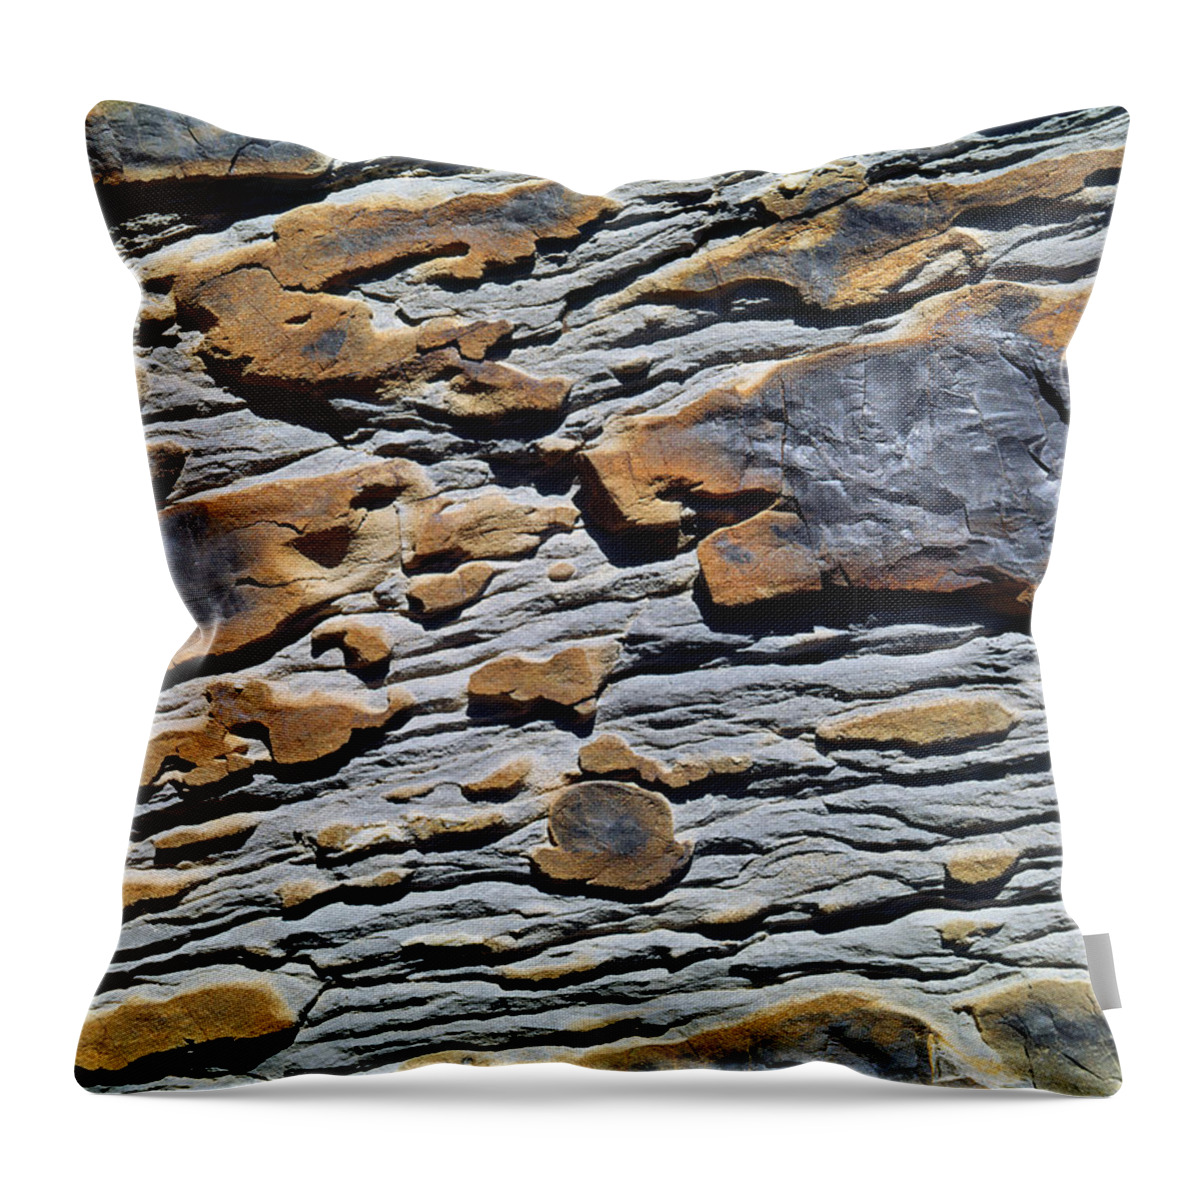 Rock Pattern Throw Pillow featuring the photograph 212M43 Rock Pattern by Ed Cooper Photography